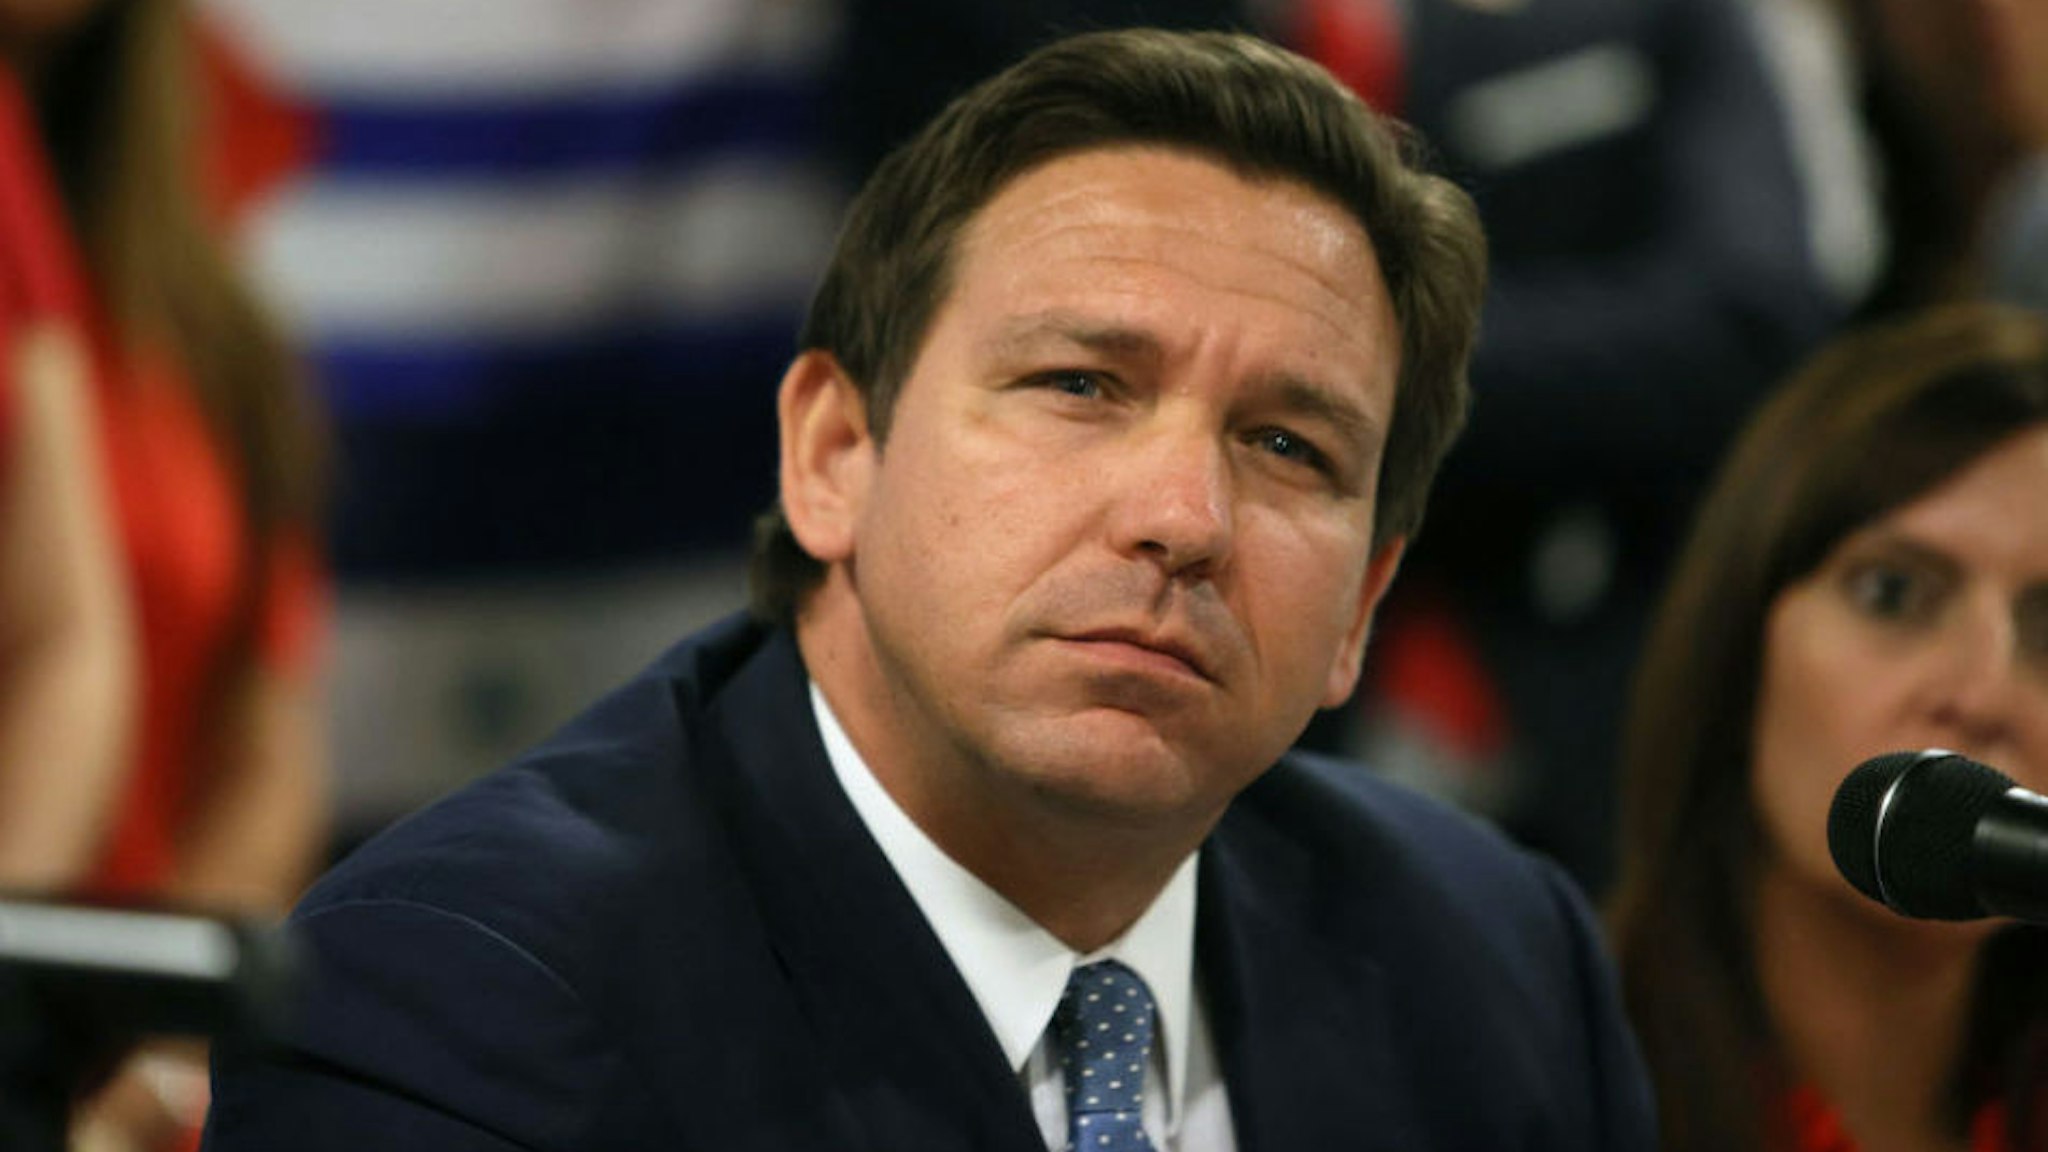 Florida Gov. Ron DeSantis takes part in a roundtable discussion about the uprising in Cuba at the American Museum of the Cuba Diaspora on July 13, 2021 in Miami, Florida.